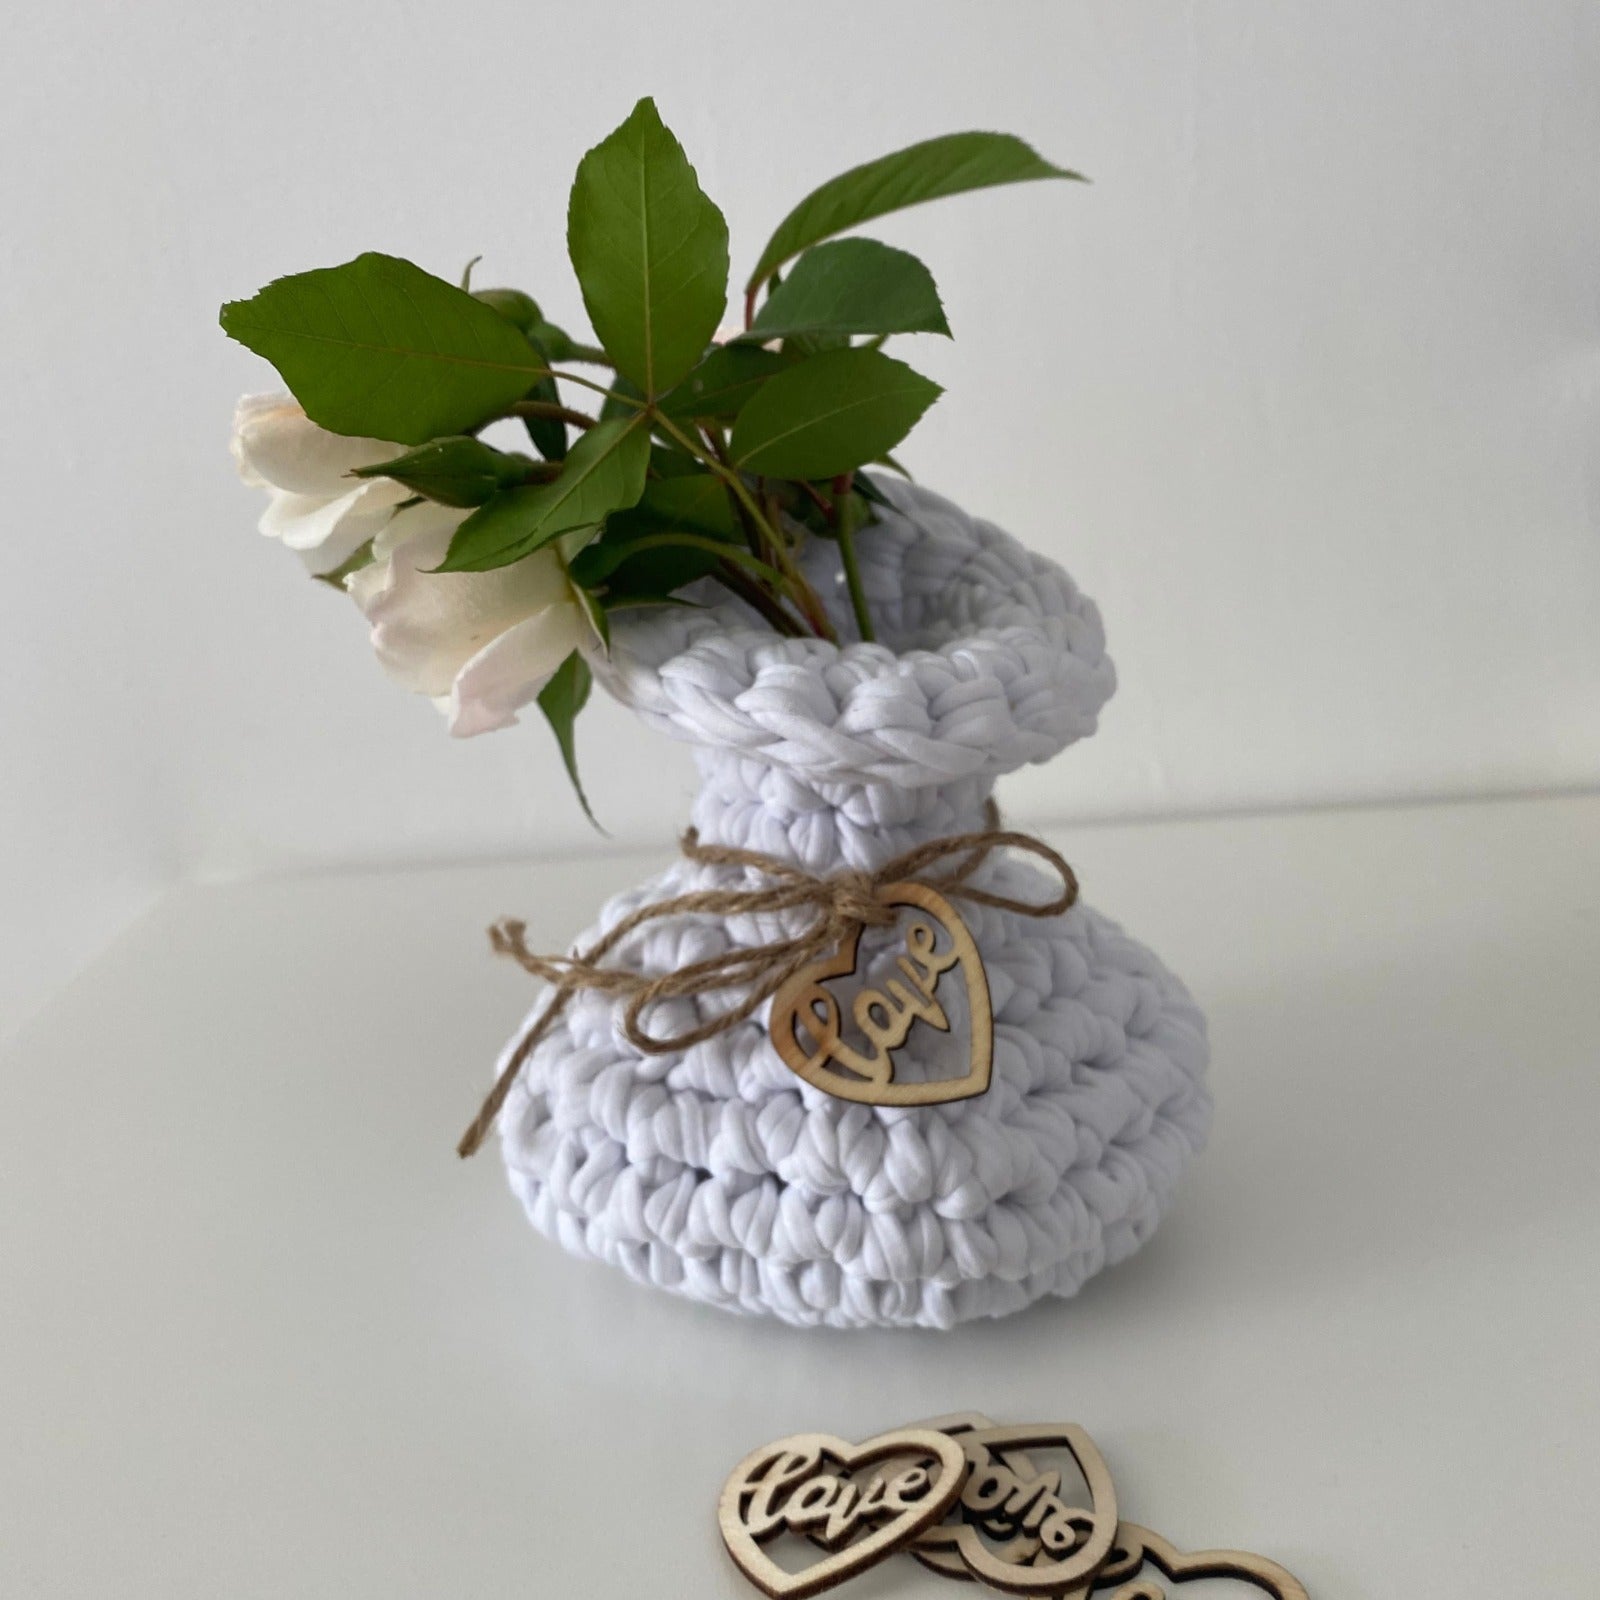 Crochet Vase, Unique Gifts for home - Looping Home